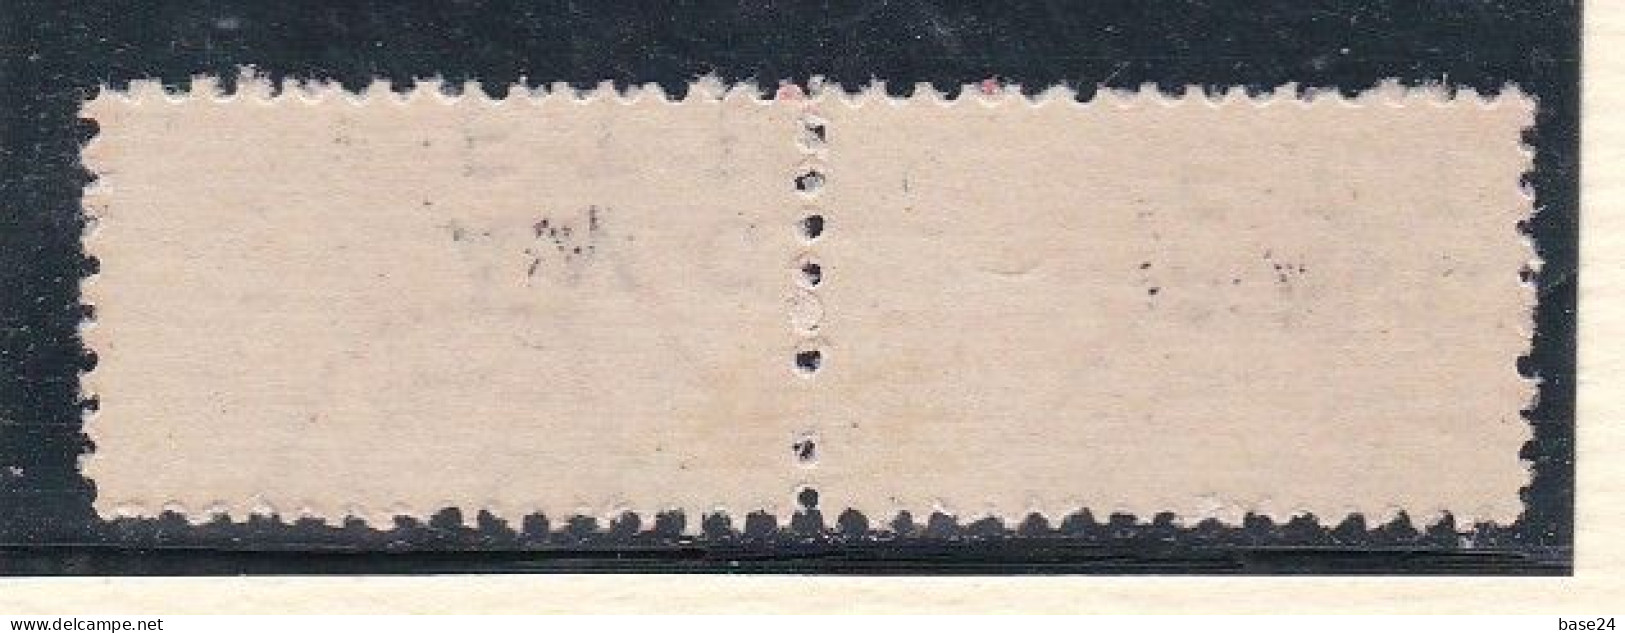 1947 Italia Italy Trieste A  PACCHI POSTALI 3 Lire MNH** Varietà Sovrastampa Fortemente Spostata Parcel Post - Postal And Consigned Parcels